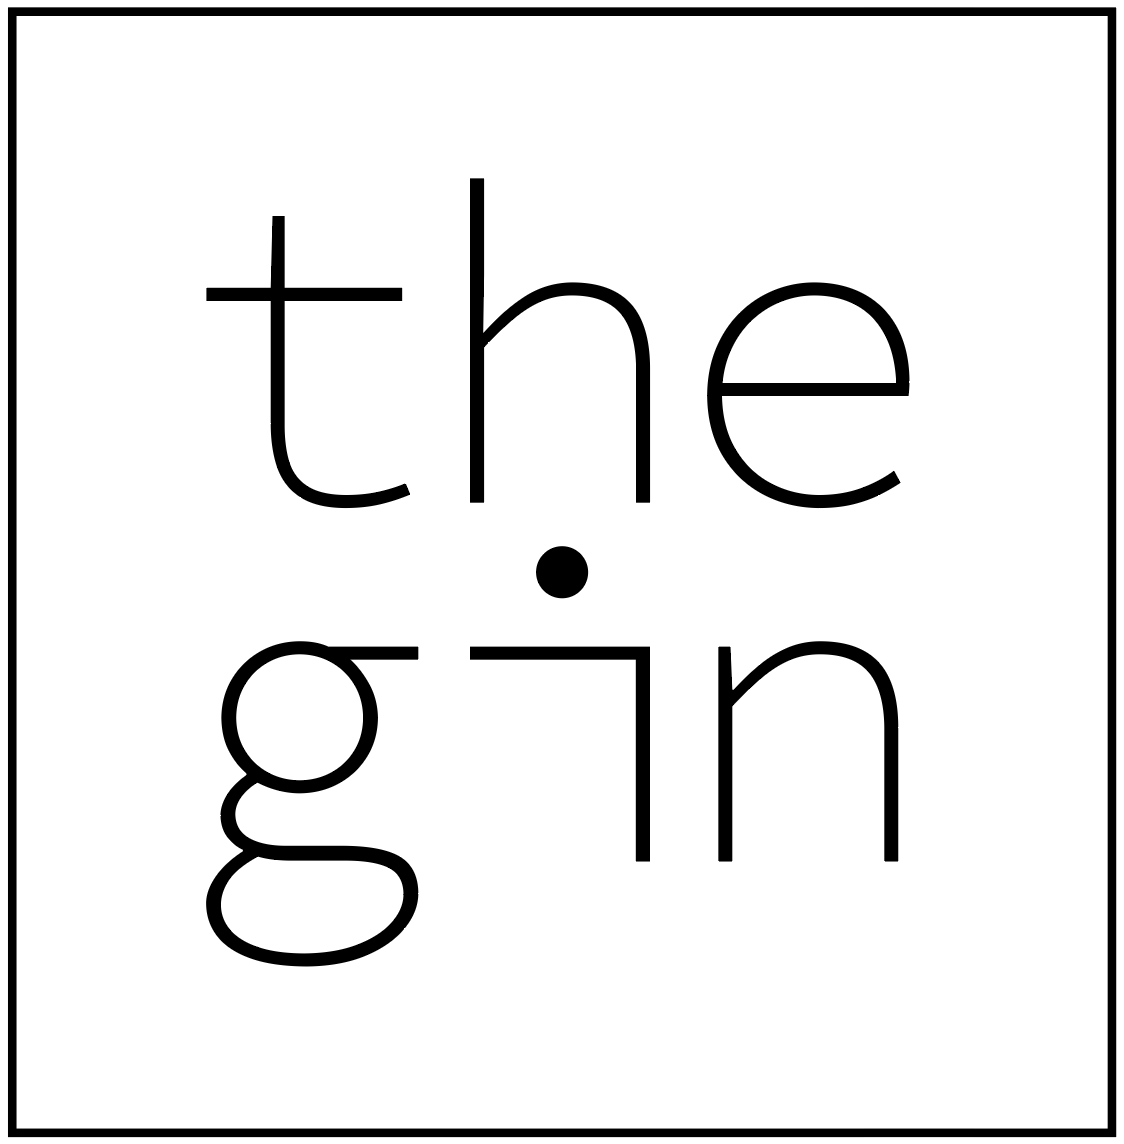 The Gin City